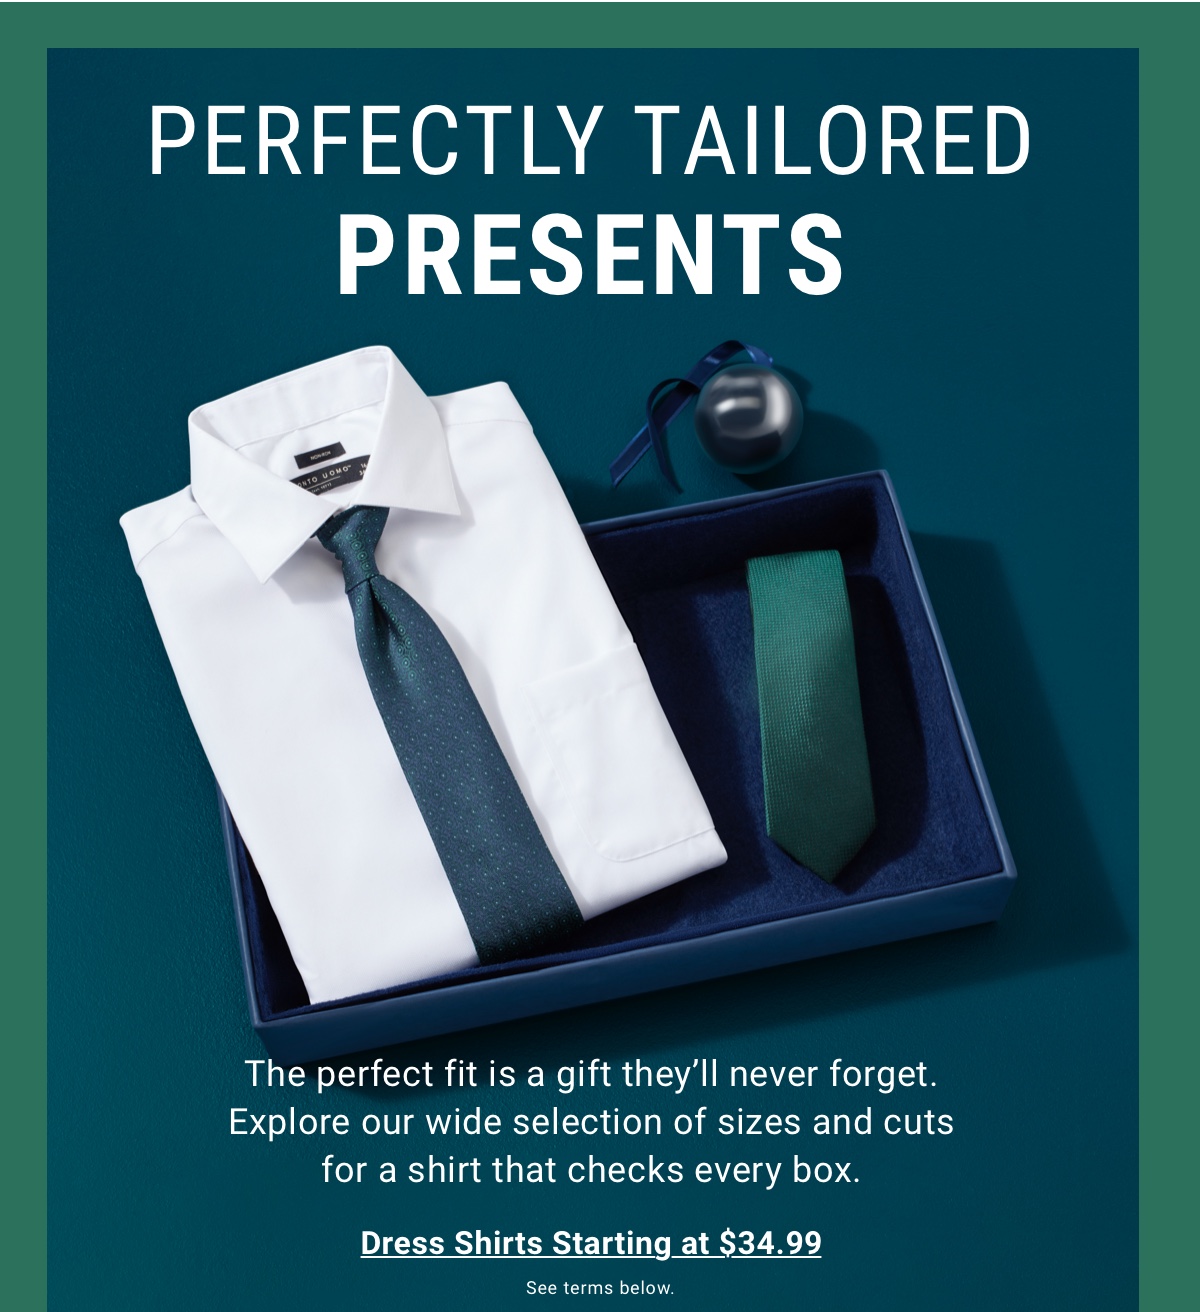 Perfectly Tailored Presents | Dress Shirts Starting at $34.99